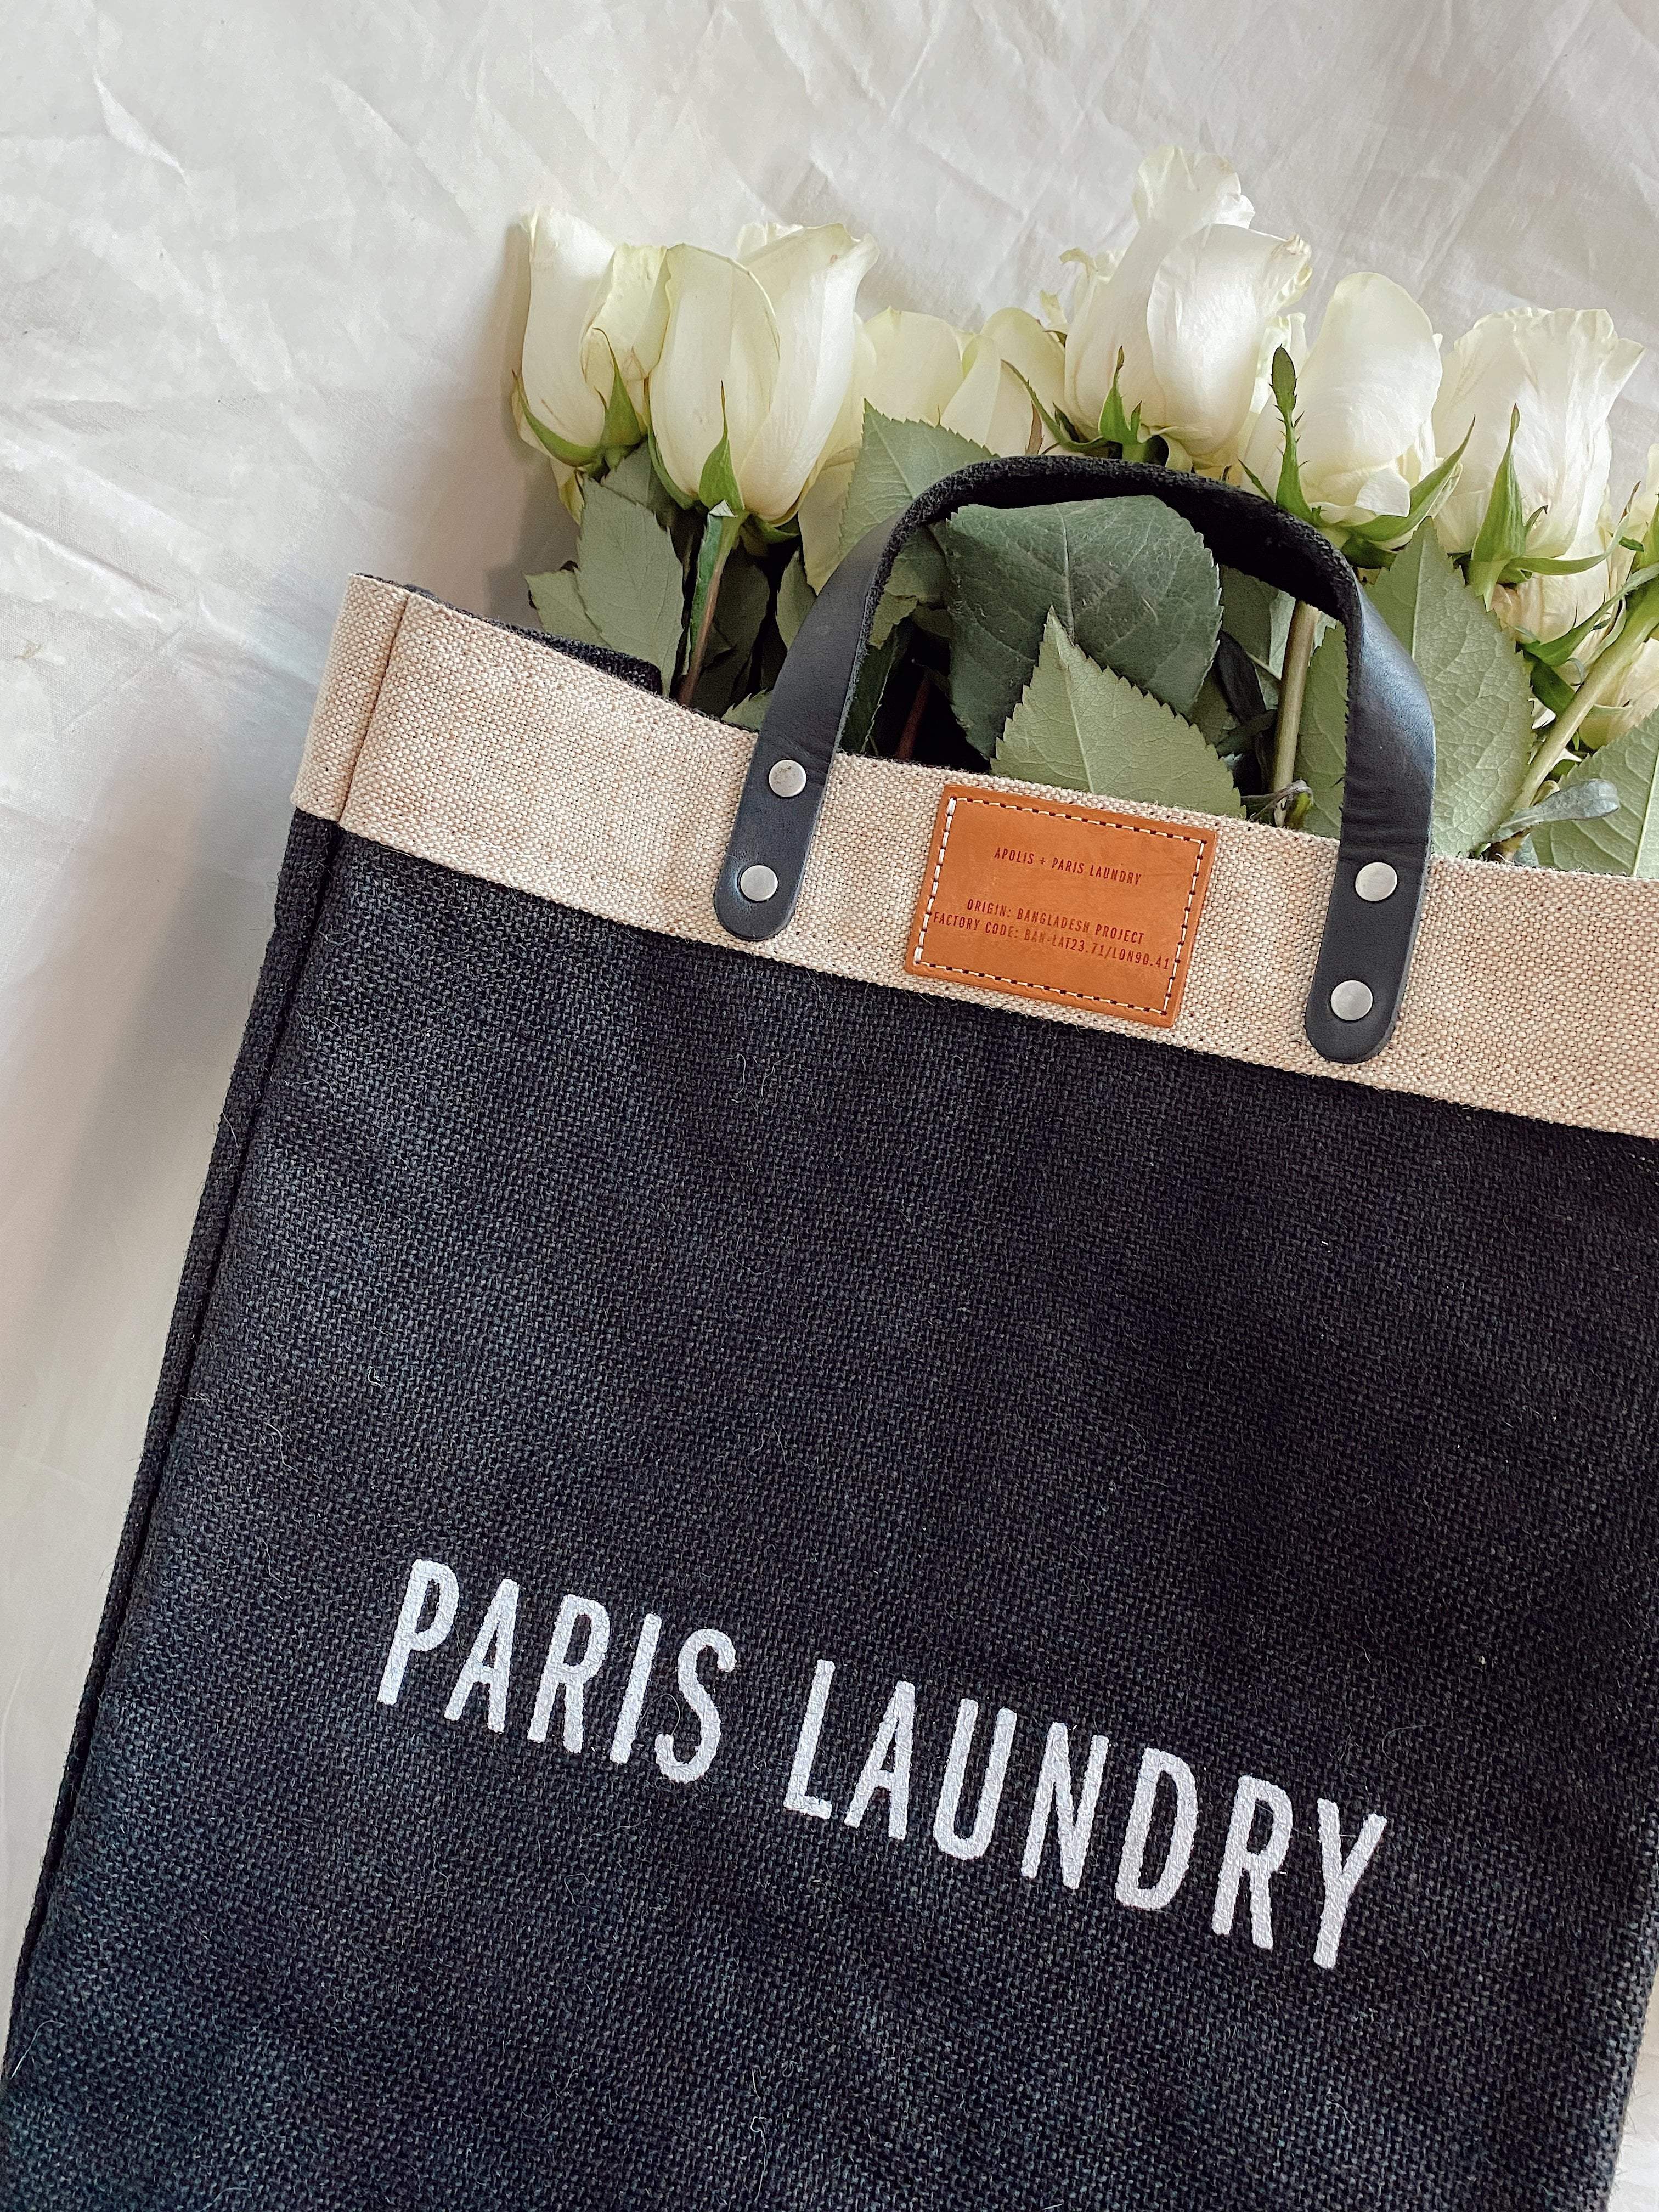 Paris Laundry Gifts & Sets Mother's Day Gift Set